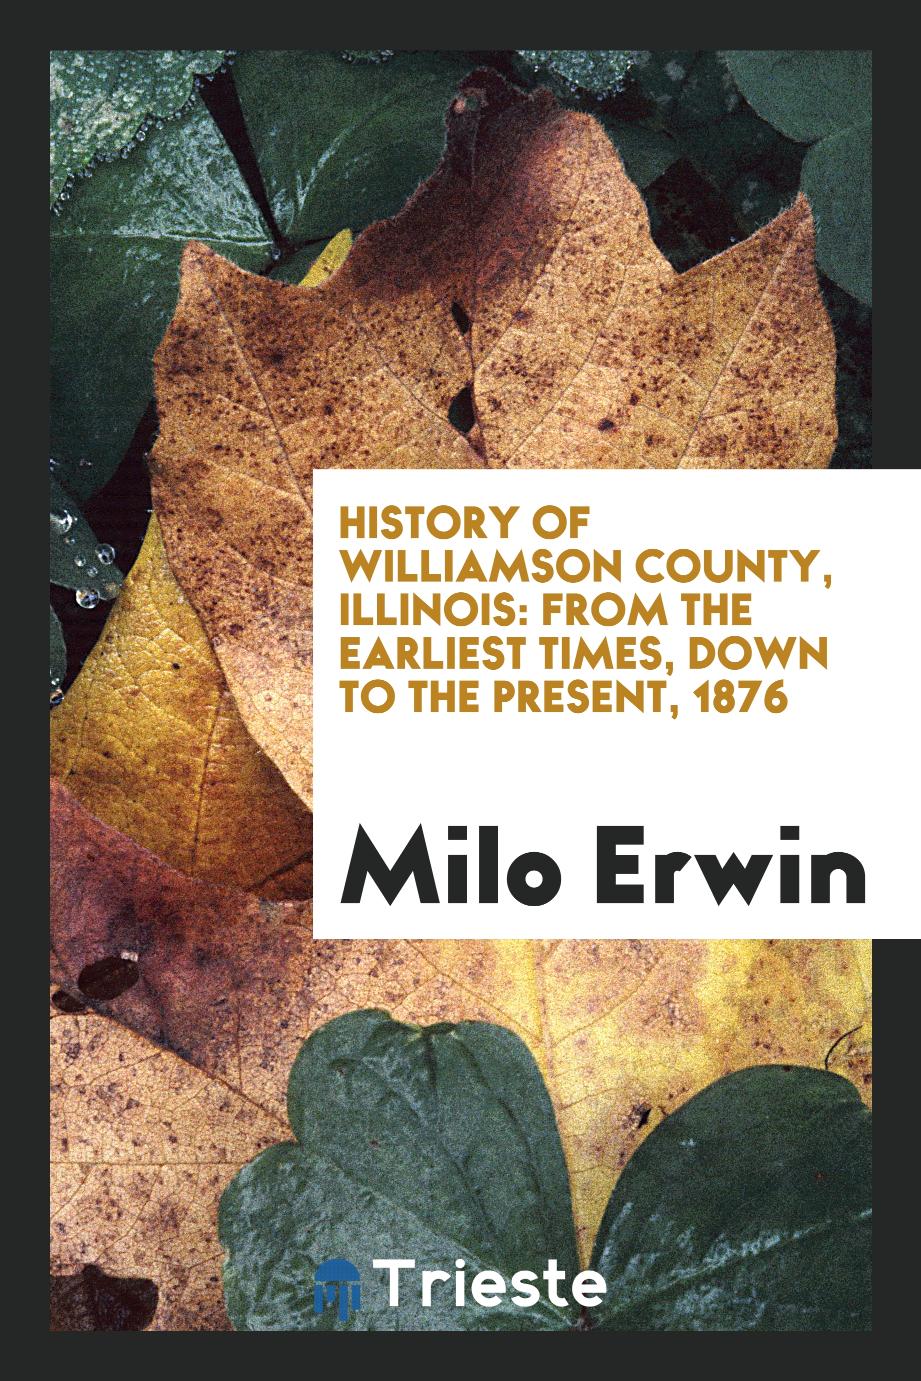 History of Williamson County, Illinois: From the Earliest Times, down to the Present, 1876